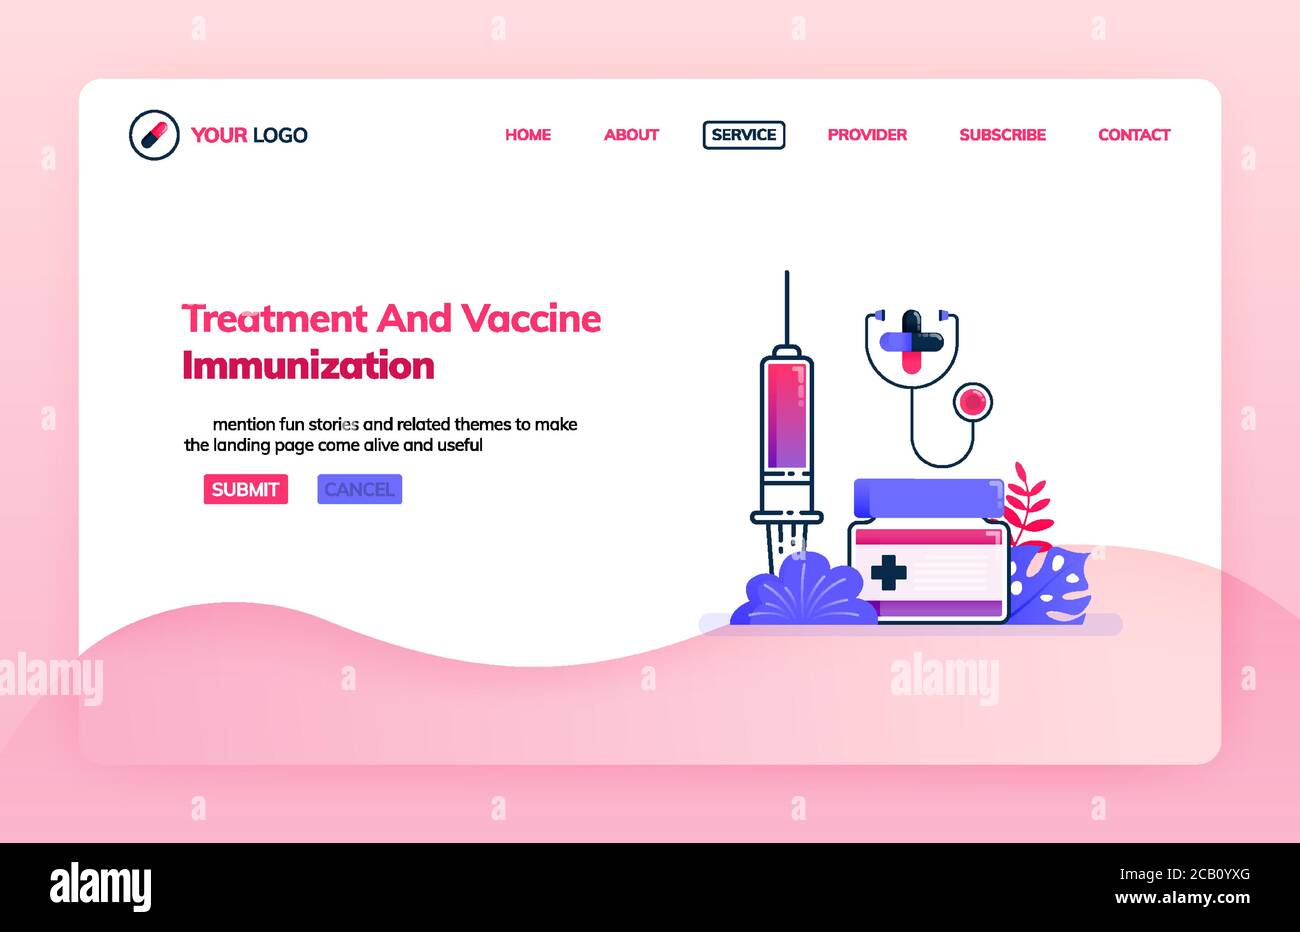 Landing page illustration template of treatment and vaccine immunization. Injection services at public hospitals. Health themes. Can be used for landi Stock Vector